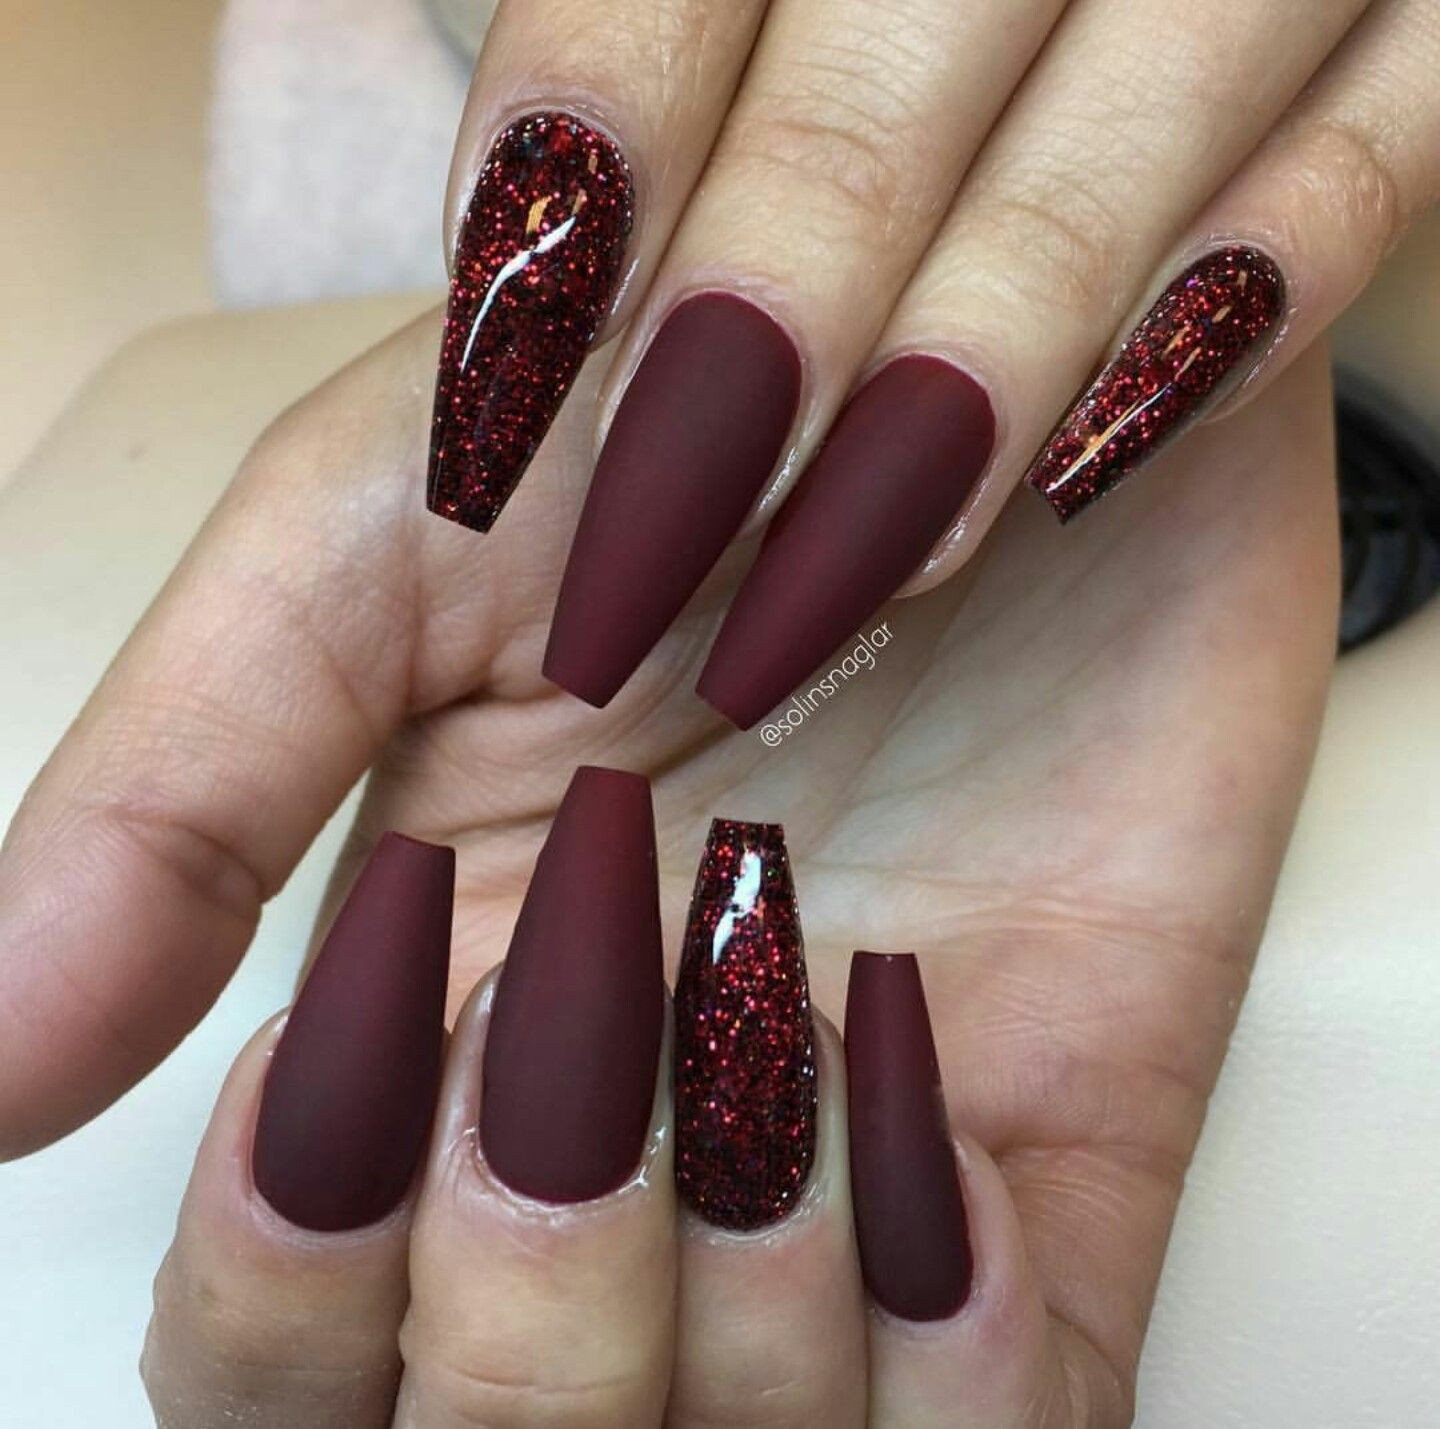 Maroon Glitter Nails
 Deep red acrylics and glitter